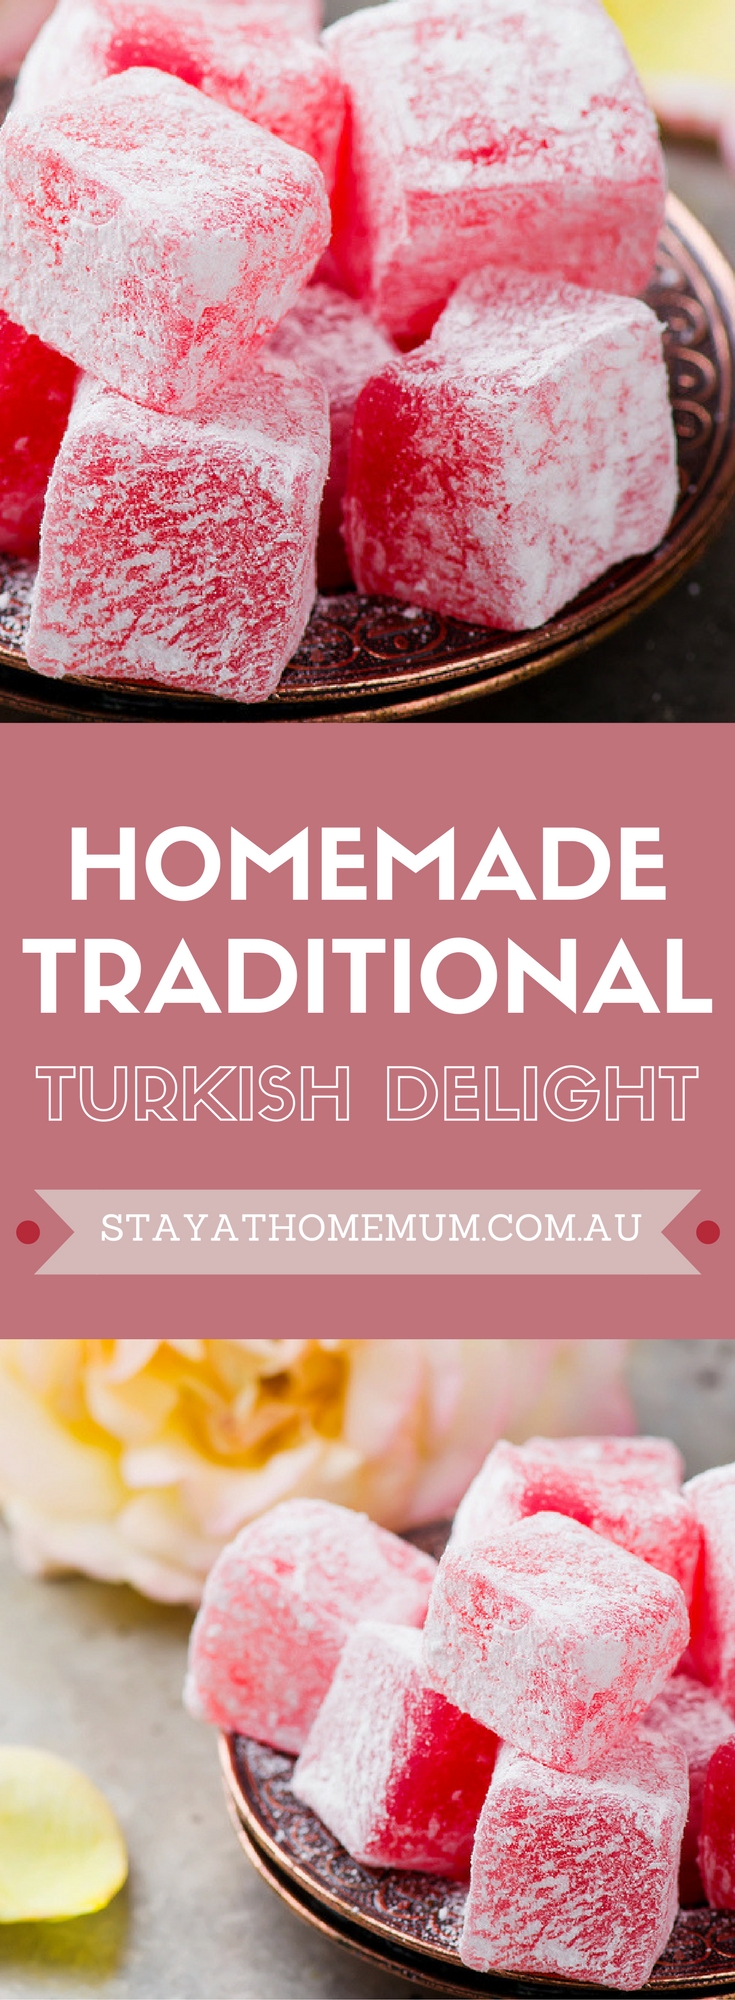 Homemade Turkish Delight Stay At Home Mum